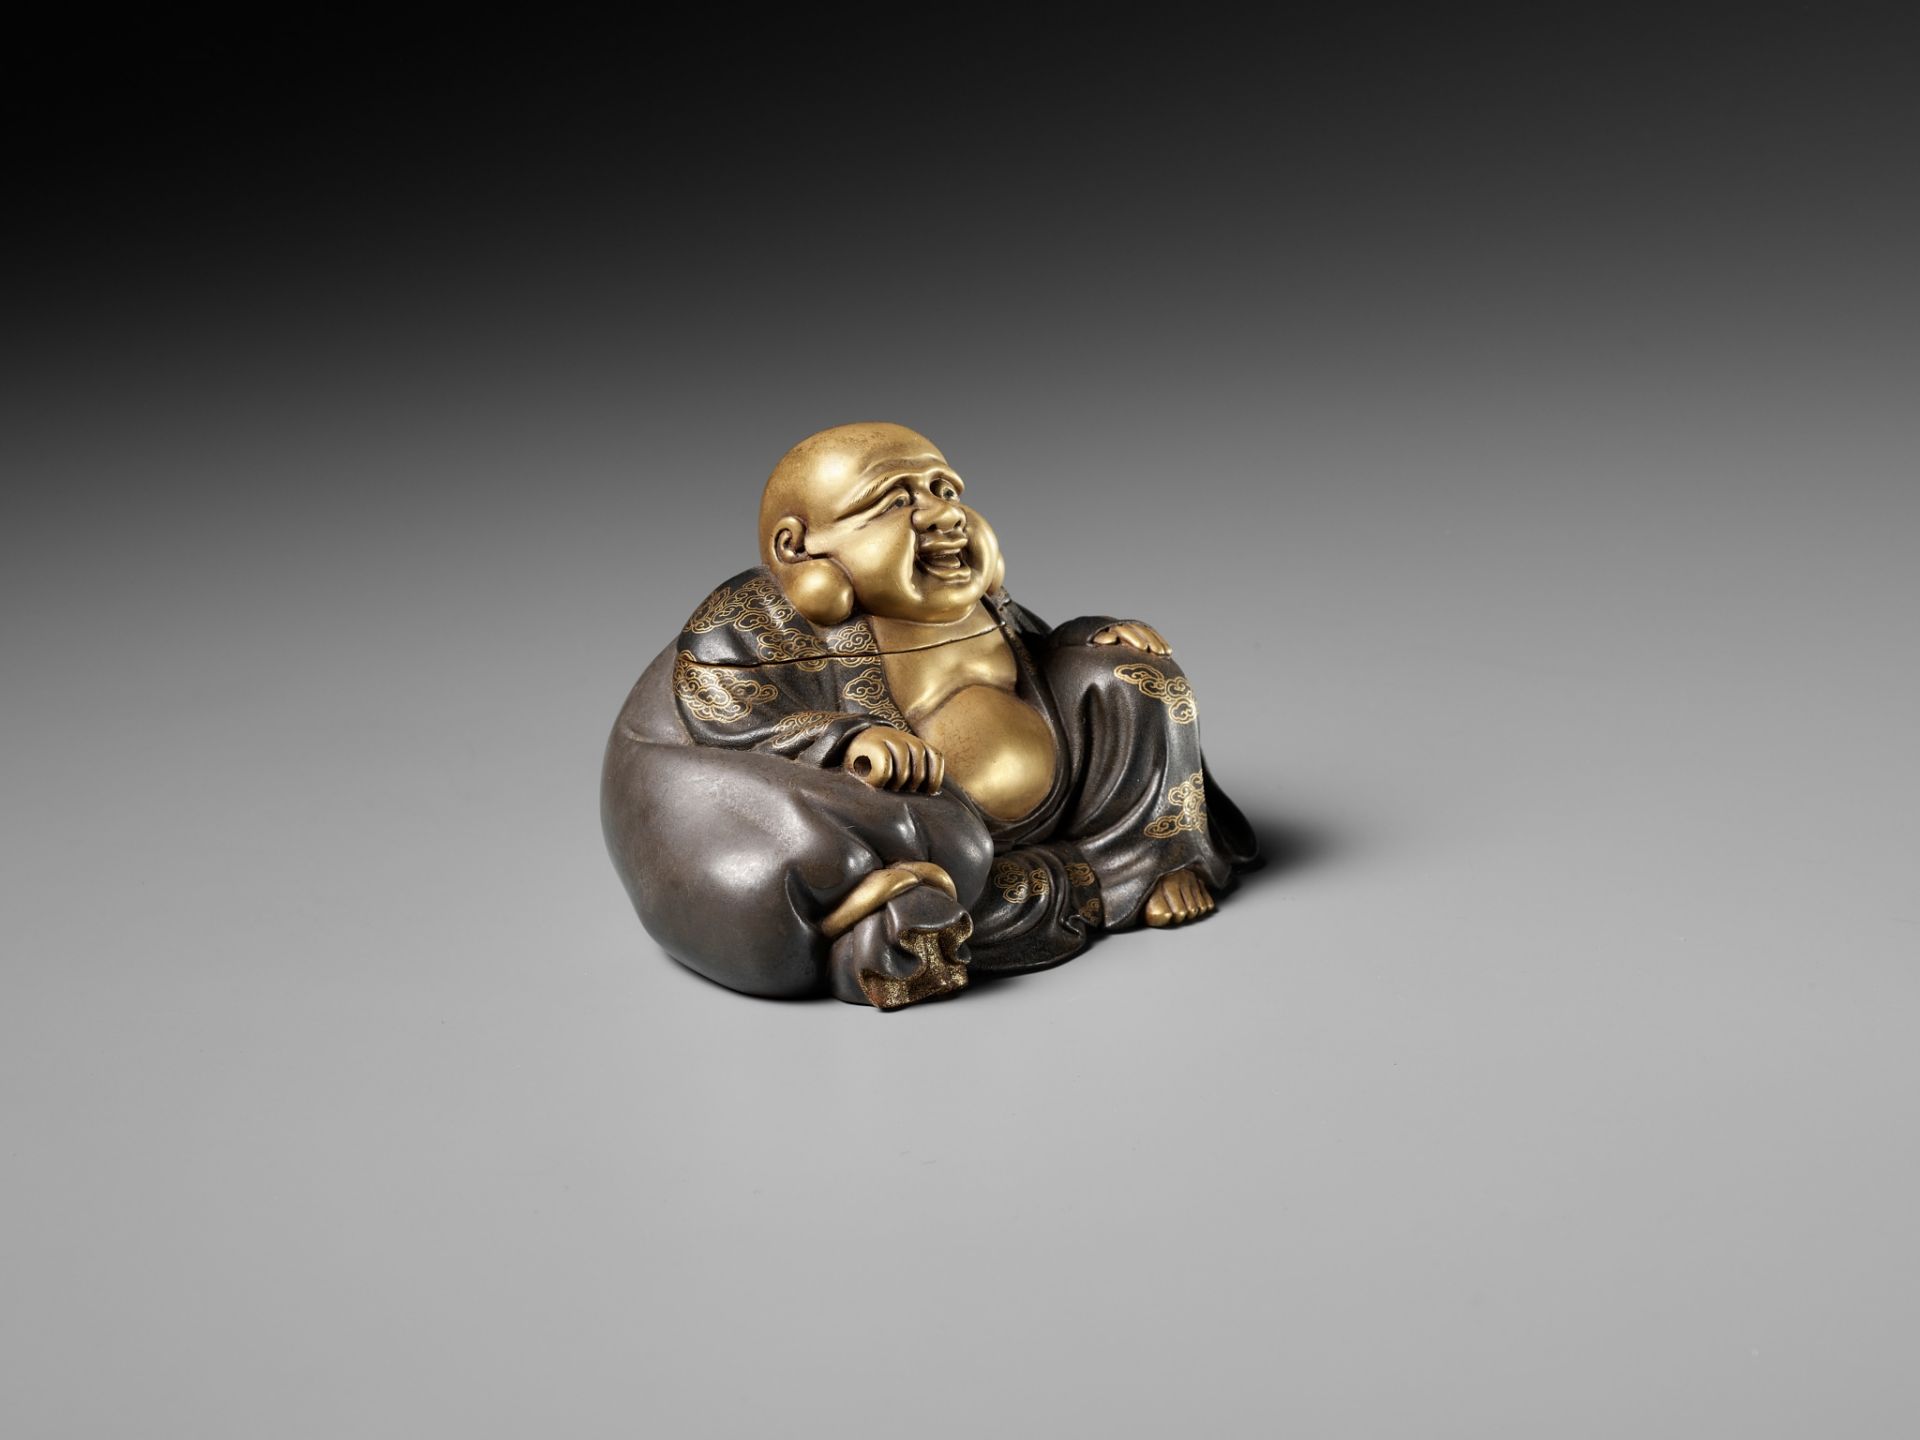 A FINE LACQUER KOGO (INCENSE BOX) AND COVER IN THE FORM OF HOTEI - Image 6 of 9